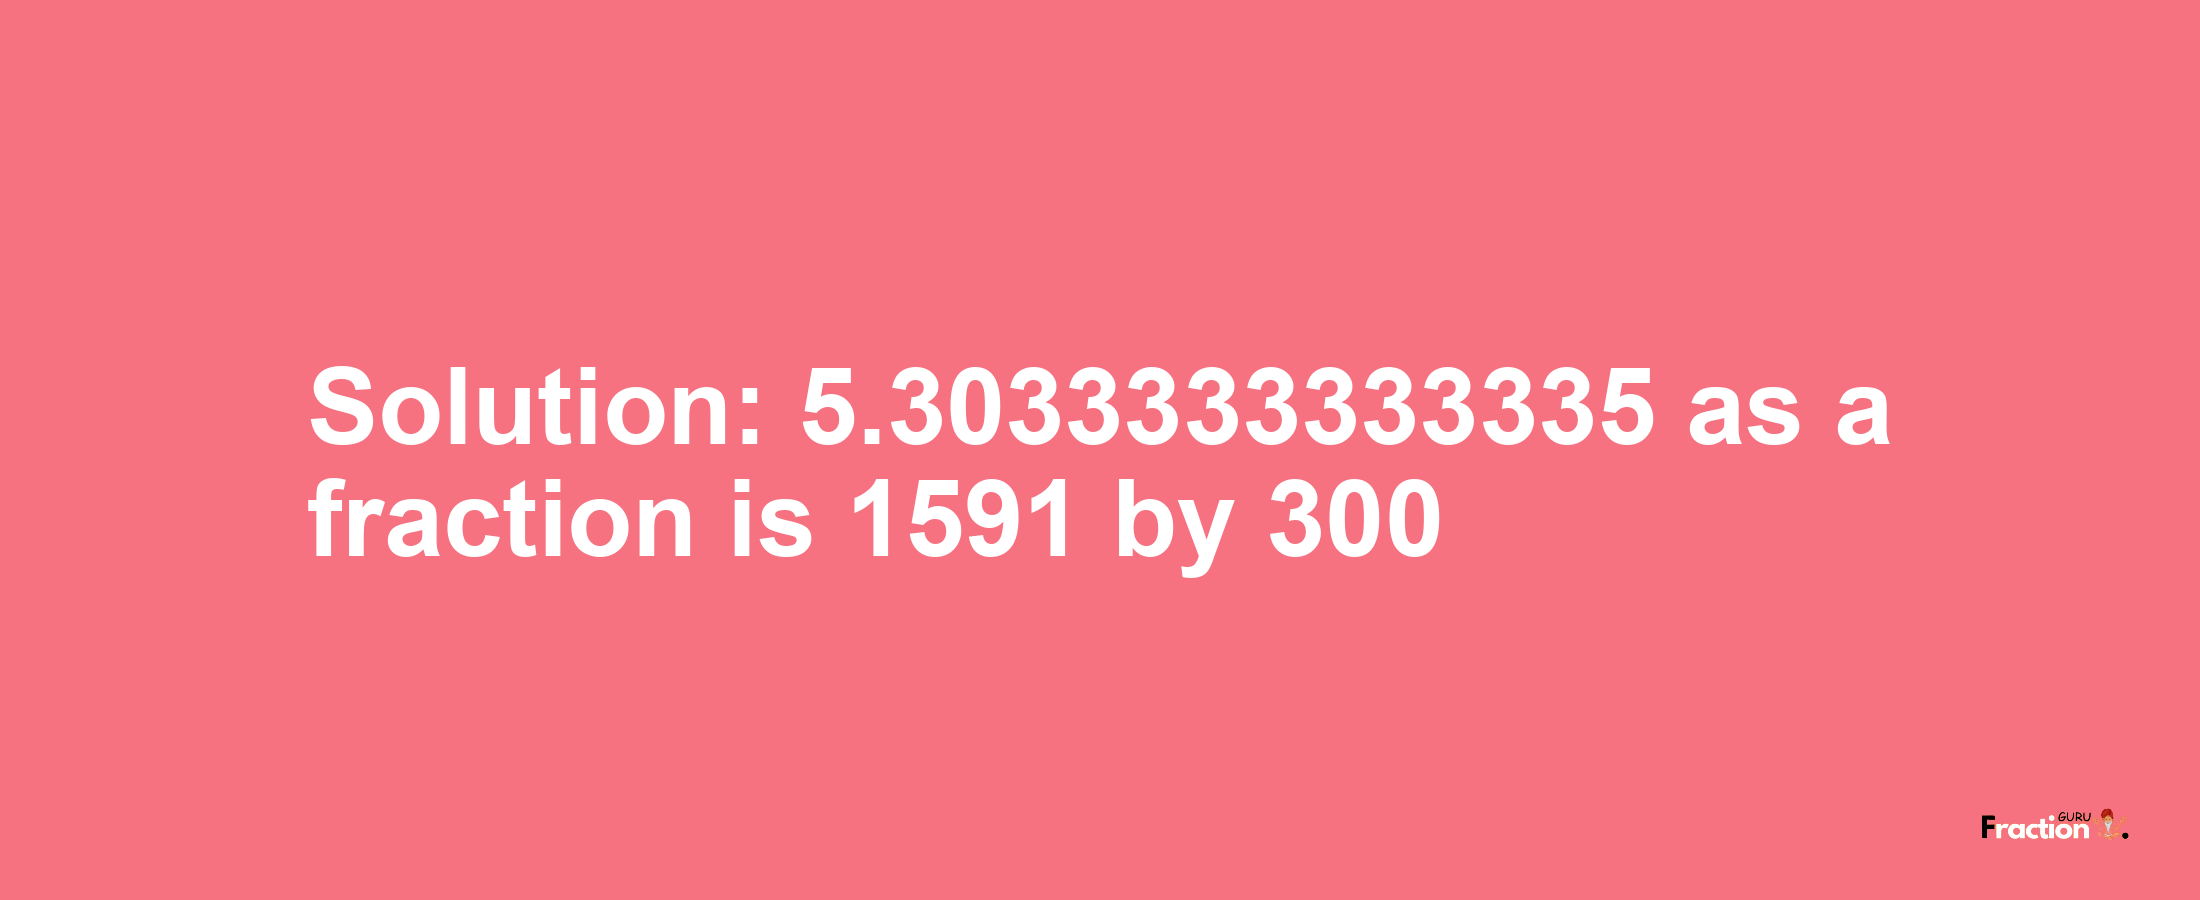 Solution:5.3033333333335 as a fraction is 1591/300